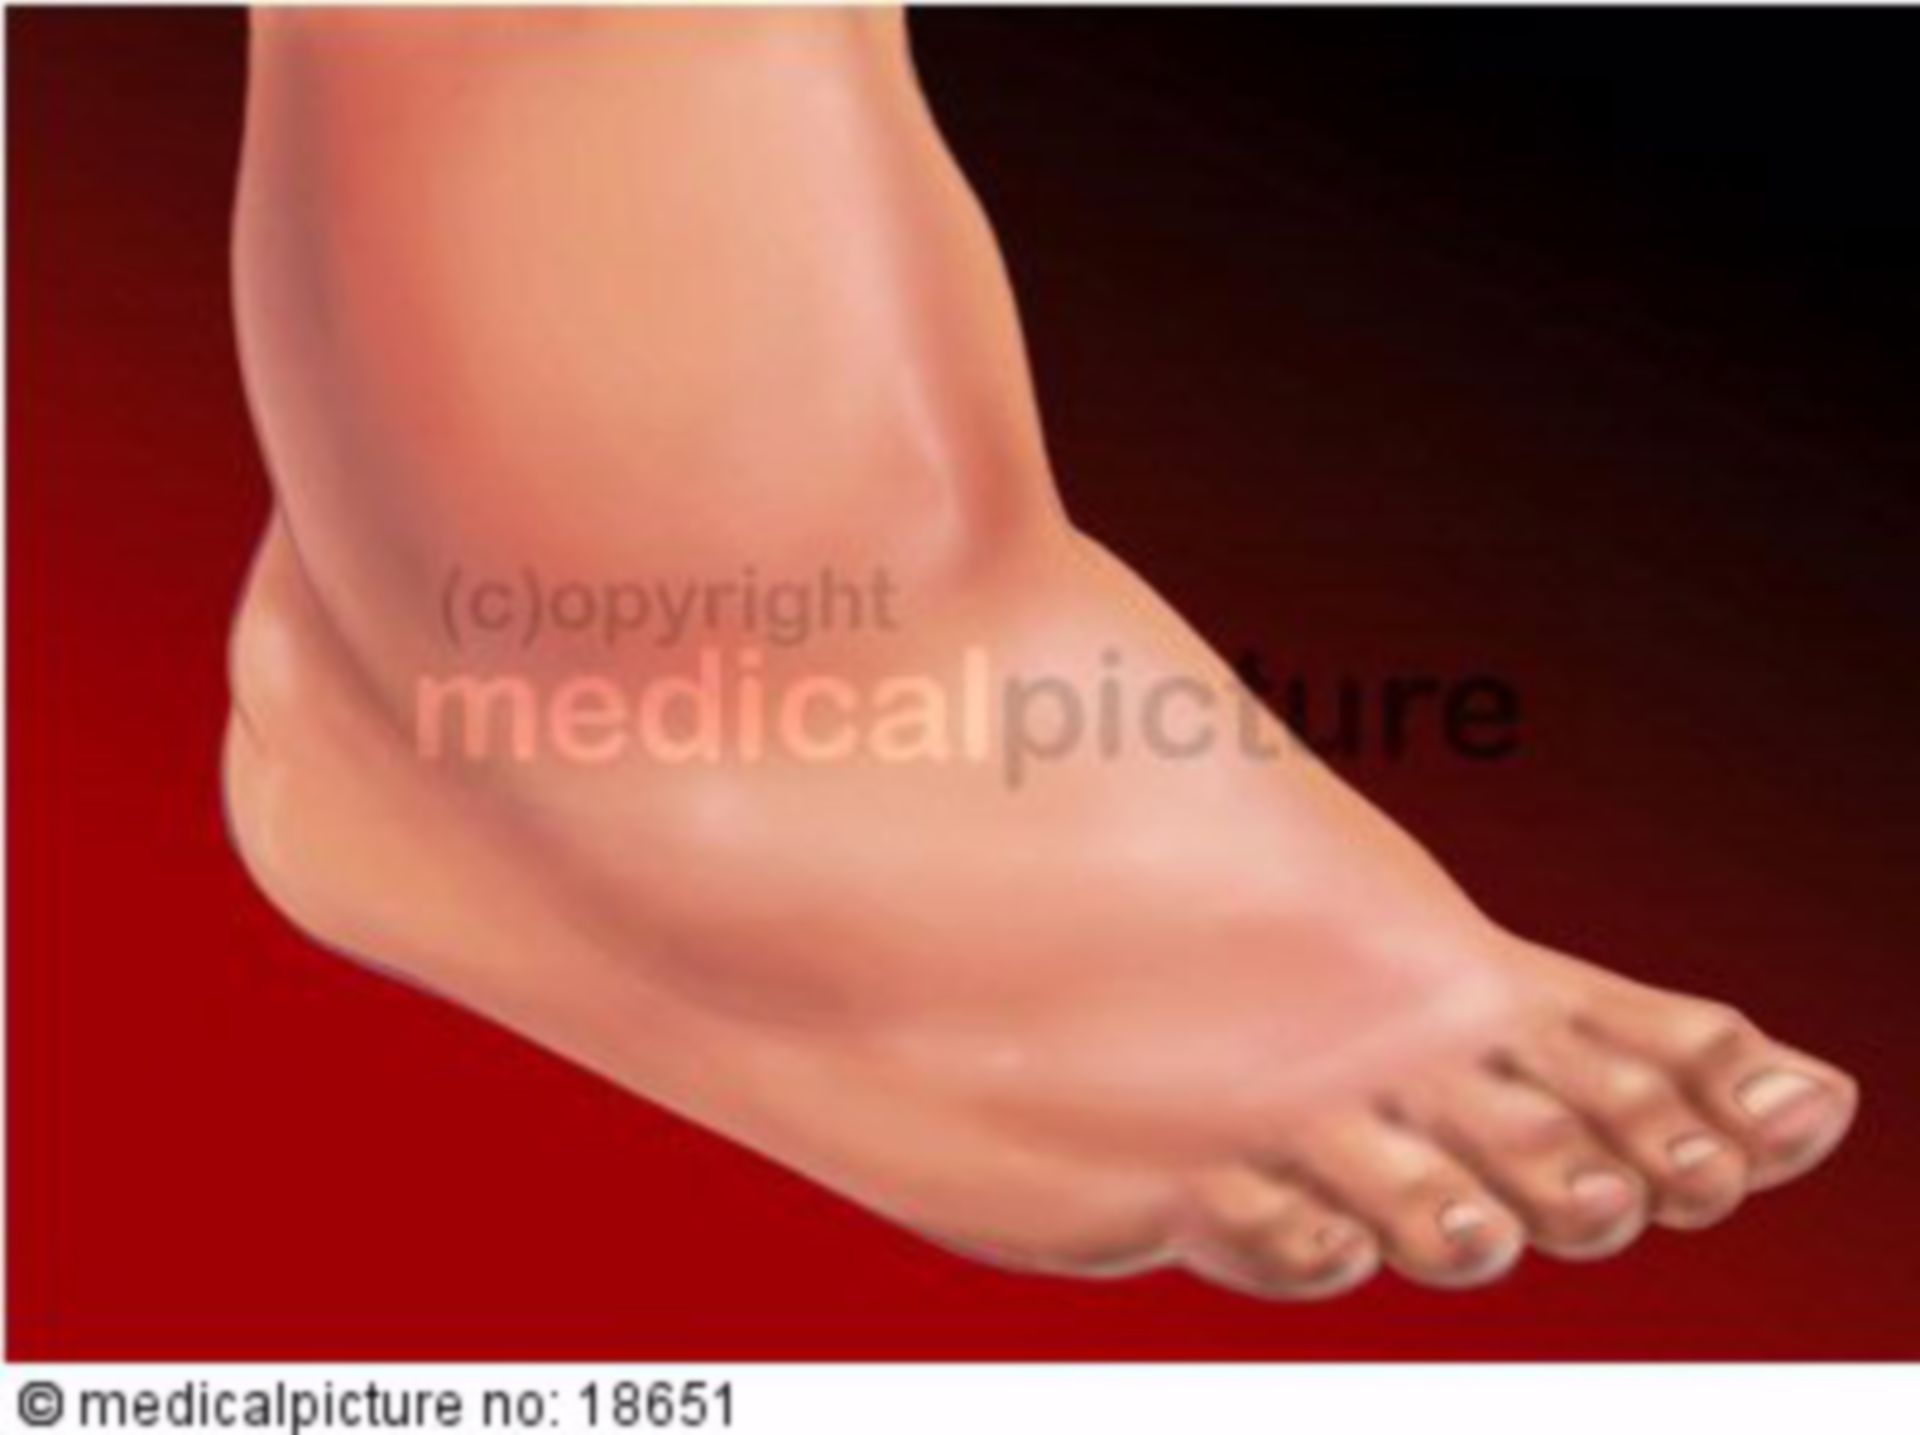 Diabetic foot syndrome charcot foot